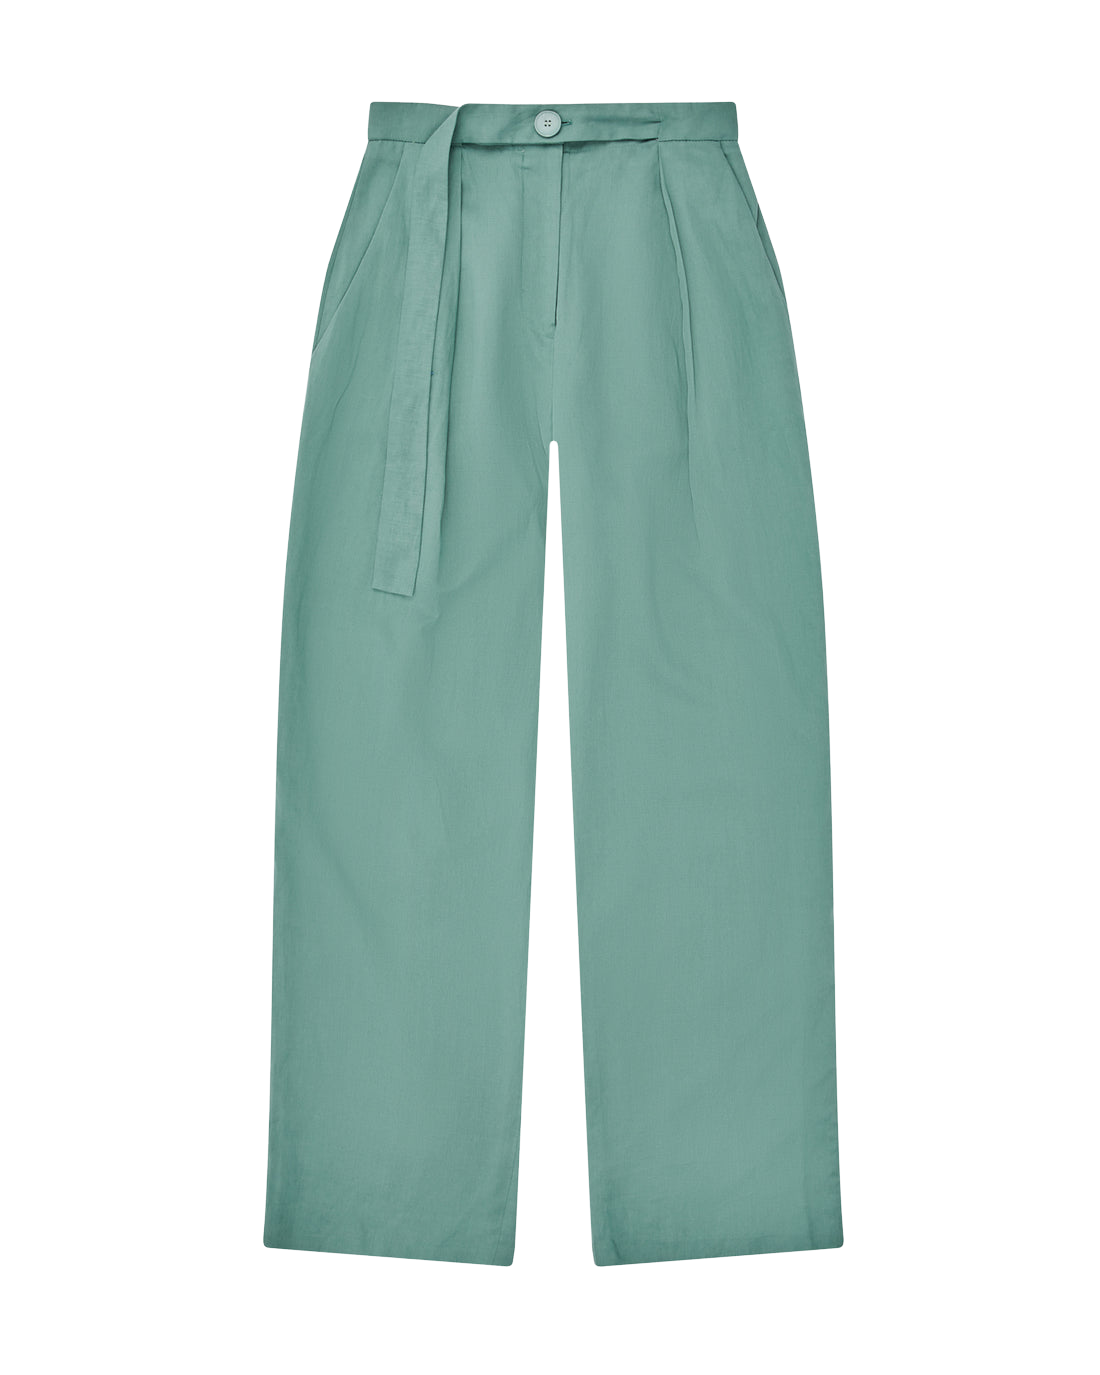 https://storage.googleapis.com/download/storage/v1/b/whering.appspot.com/o/marketplace_product_images%2Fking-tuckfield-utility-mac-wrap-and-tie-trouser-turquoise-5fMrPGRd5pRWUmej6S1QLD.png?generation=1681220366179449&alt=media